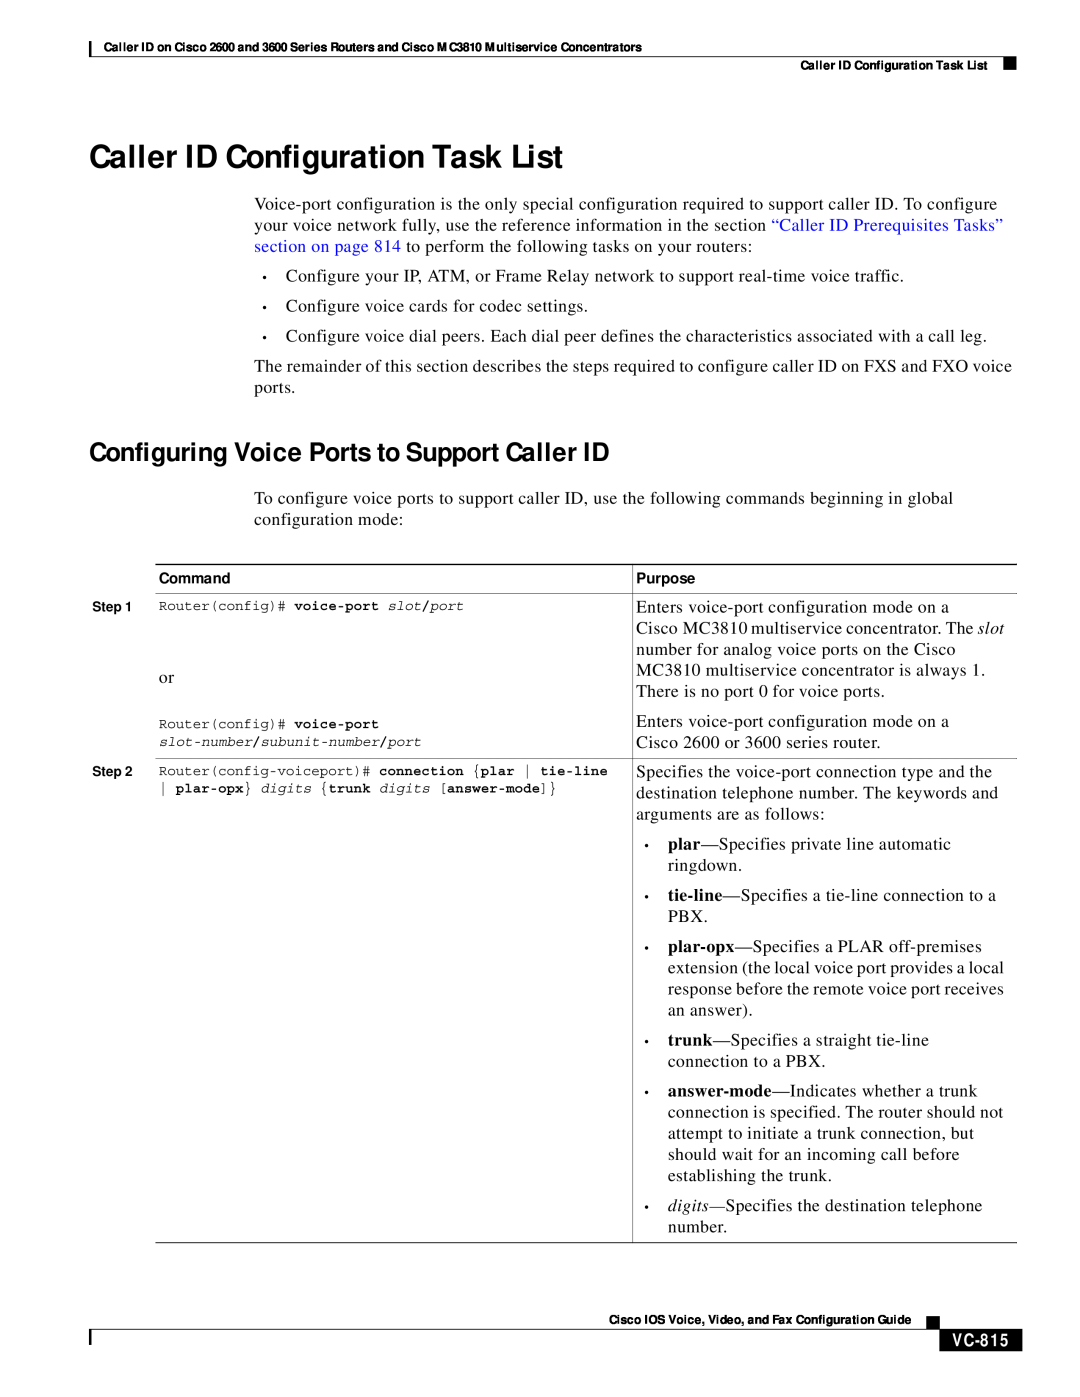 Cisco Systems 2600 Caller ID Configuration Task List, Configuring Voice Ports to Support Caller ID, Command, Purpose 